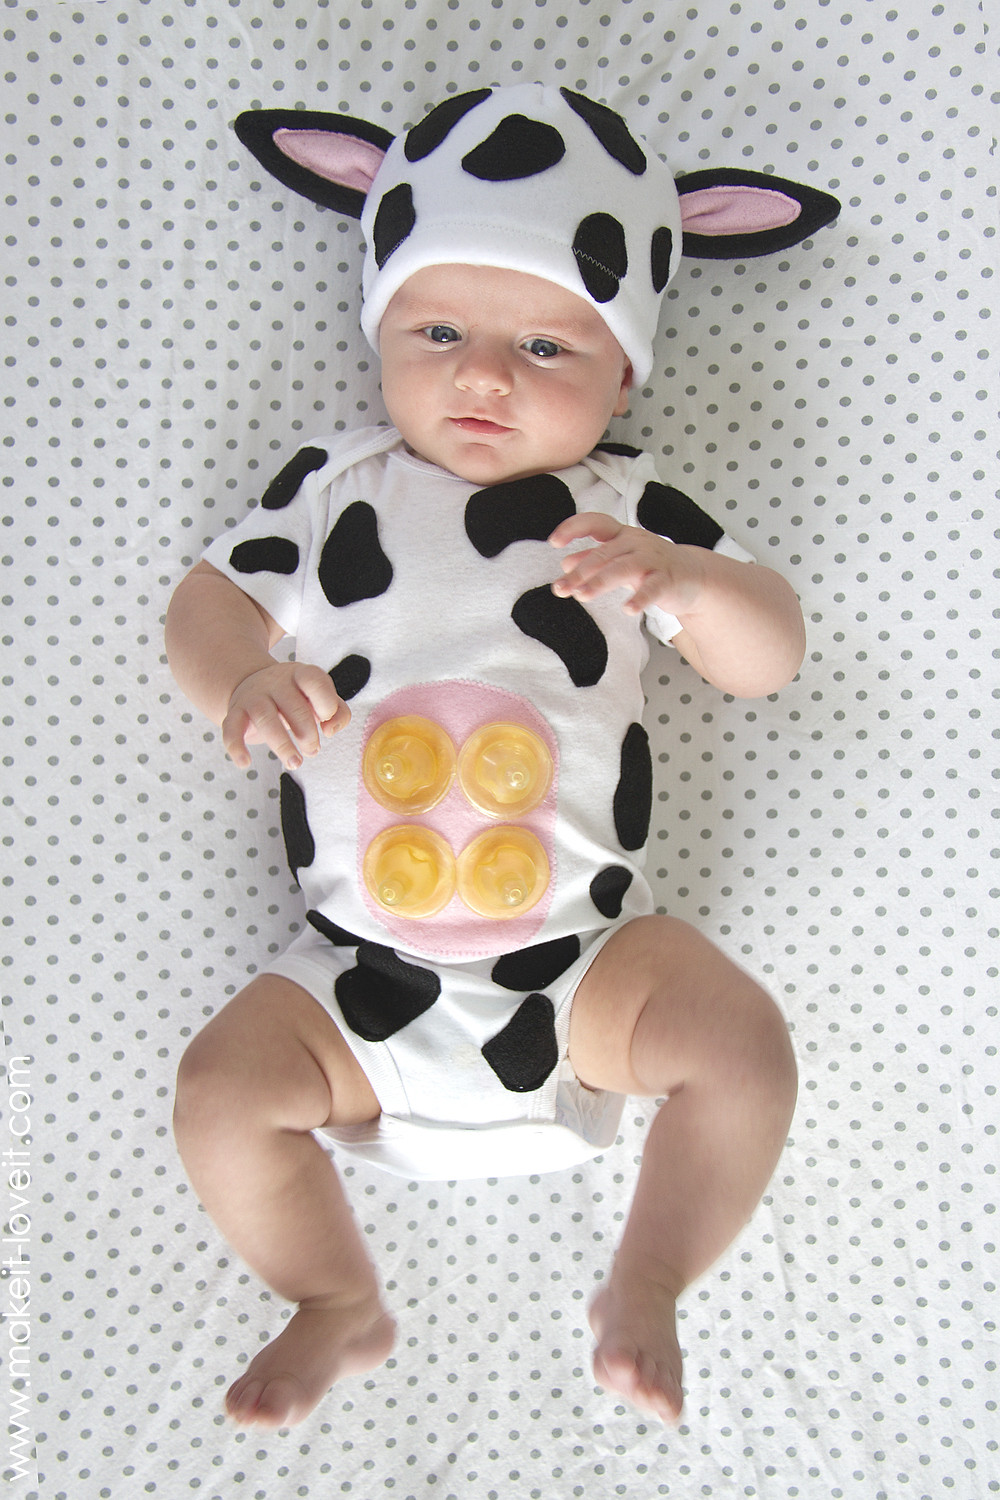 DIY Baby Halloween Costumes
 Baby Cow Costume with an UDDER